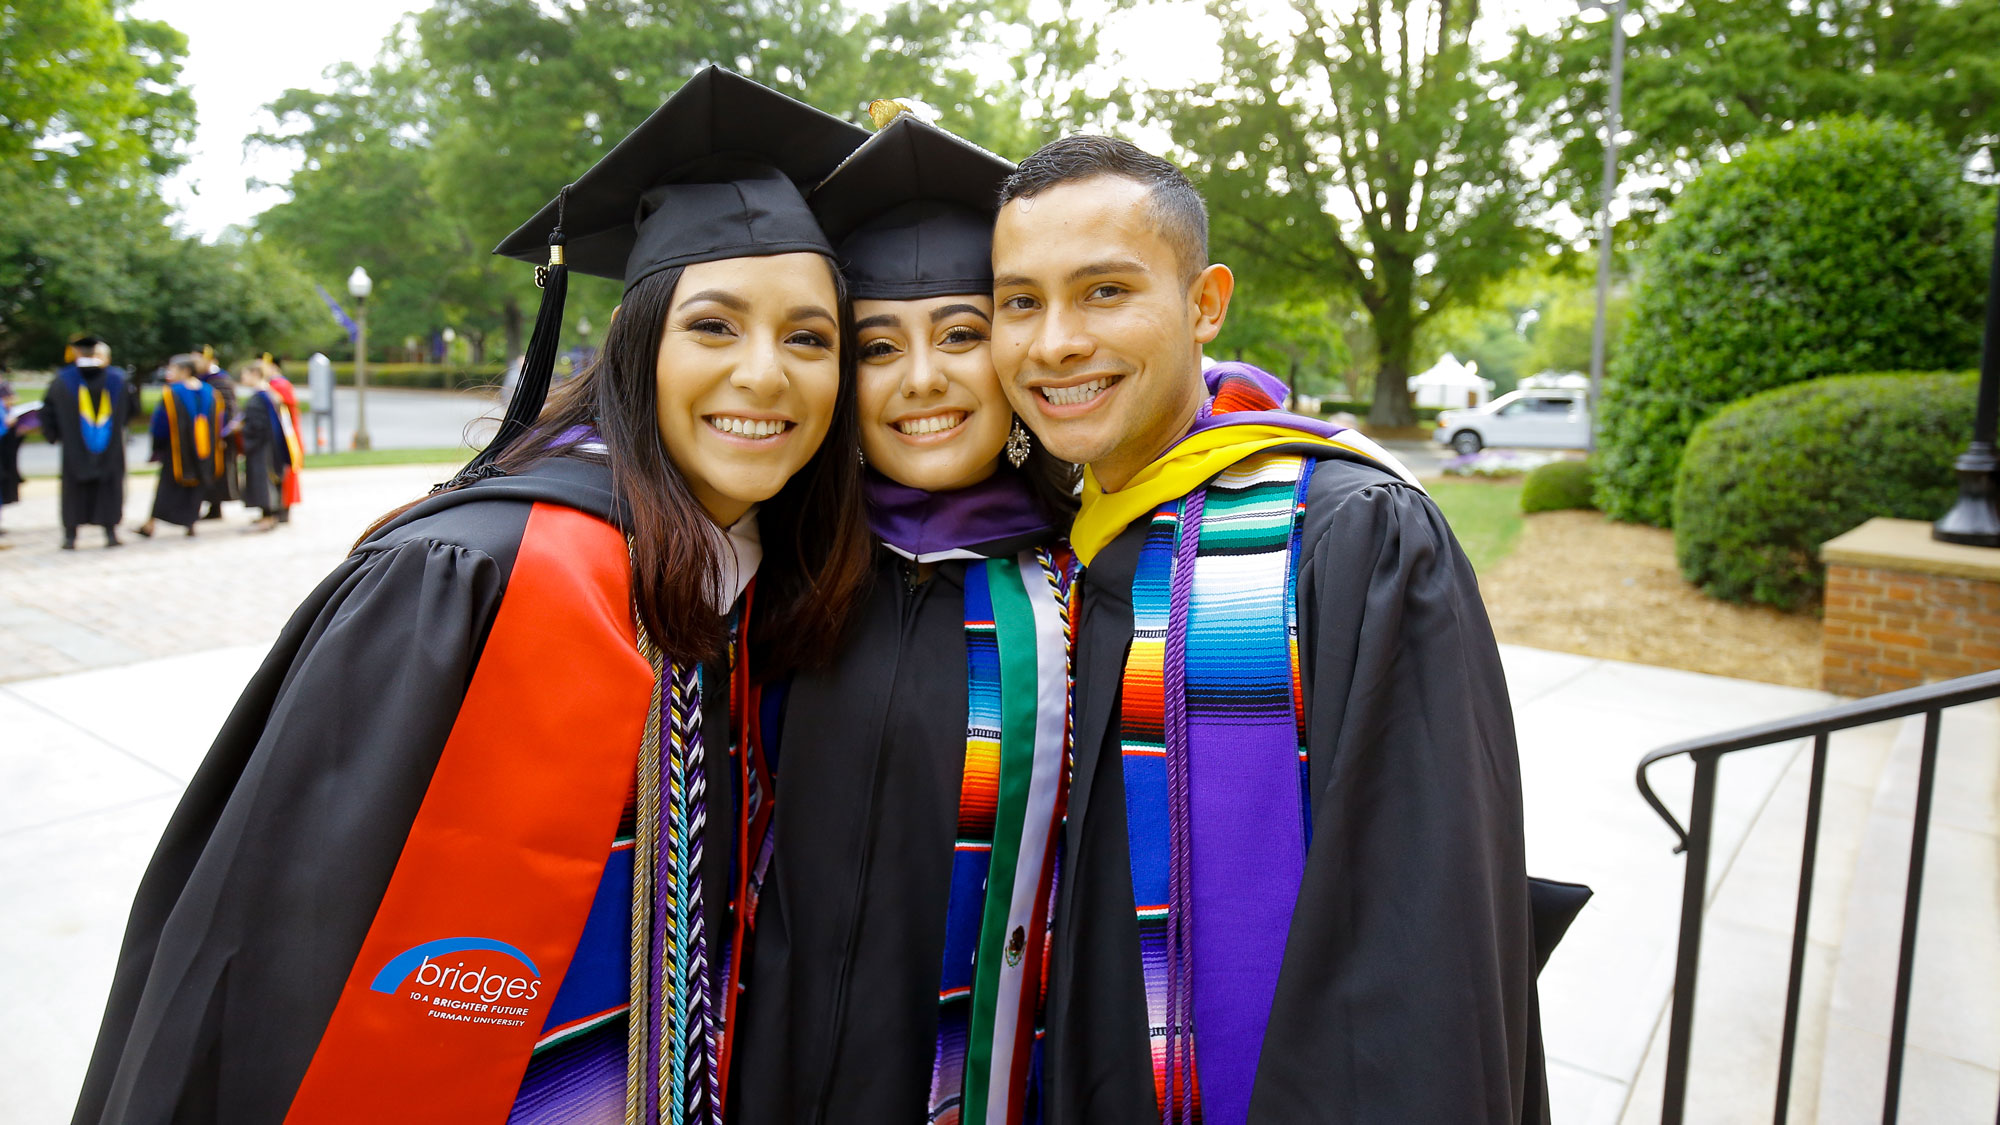 Three students smiling together with robes on